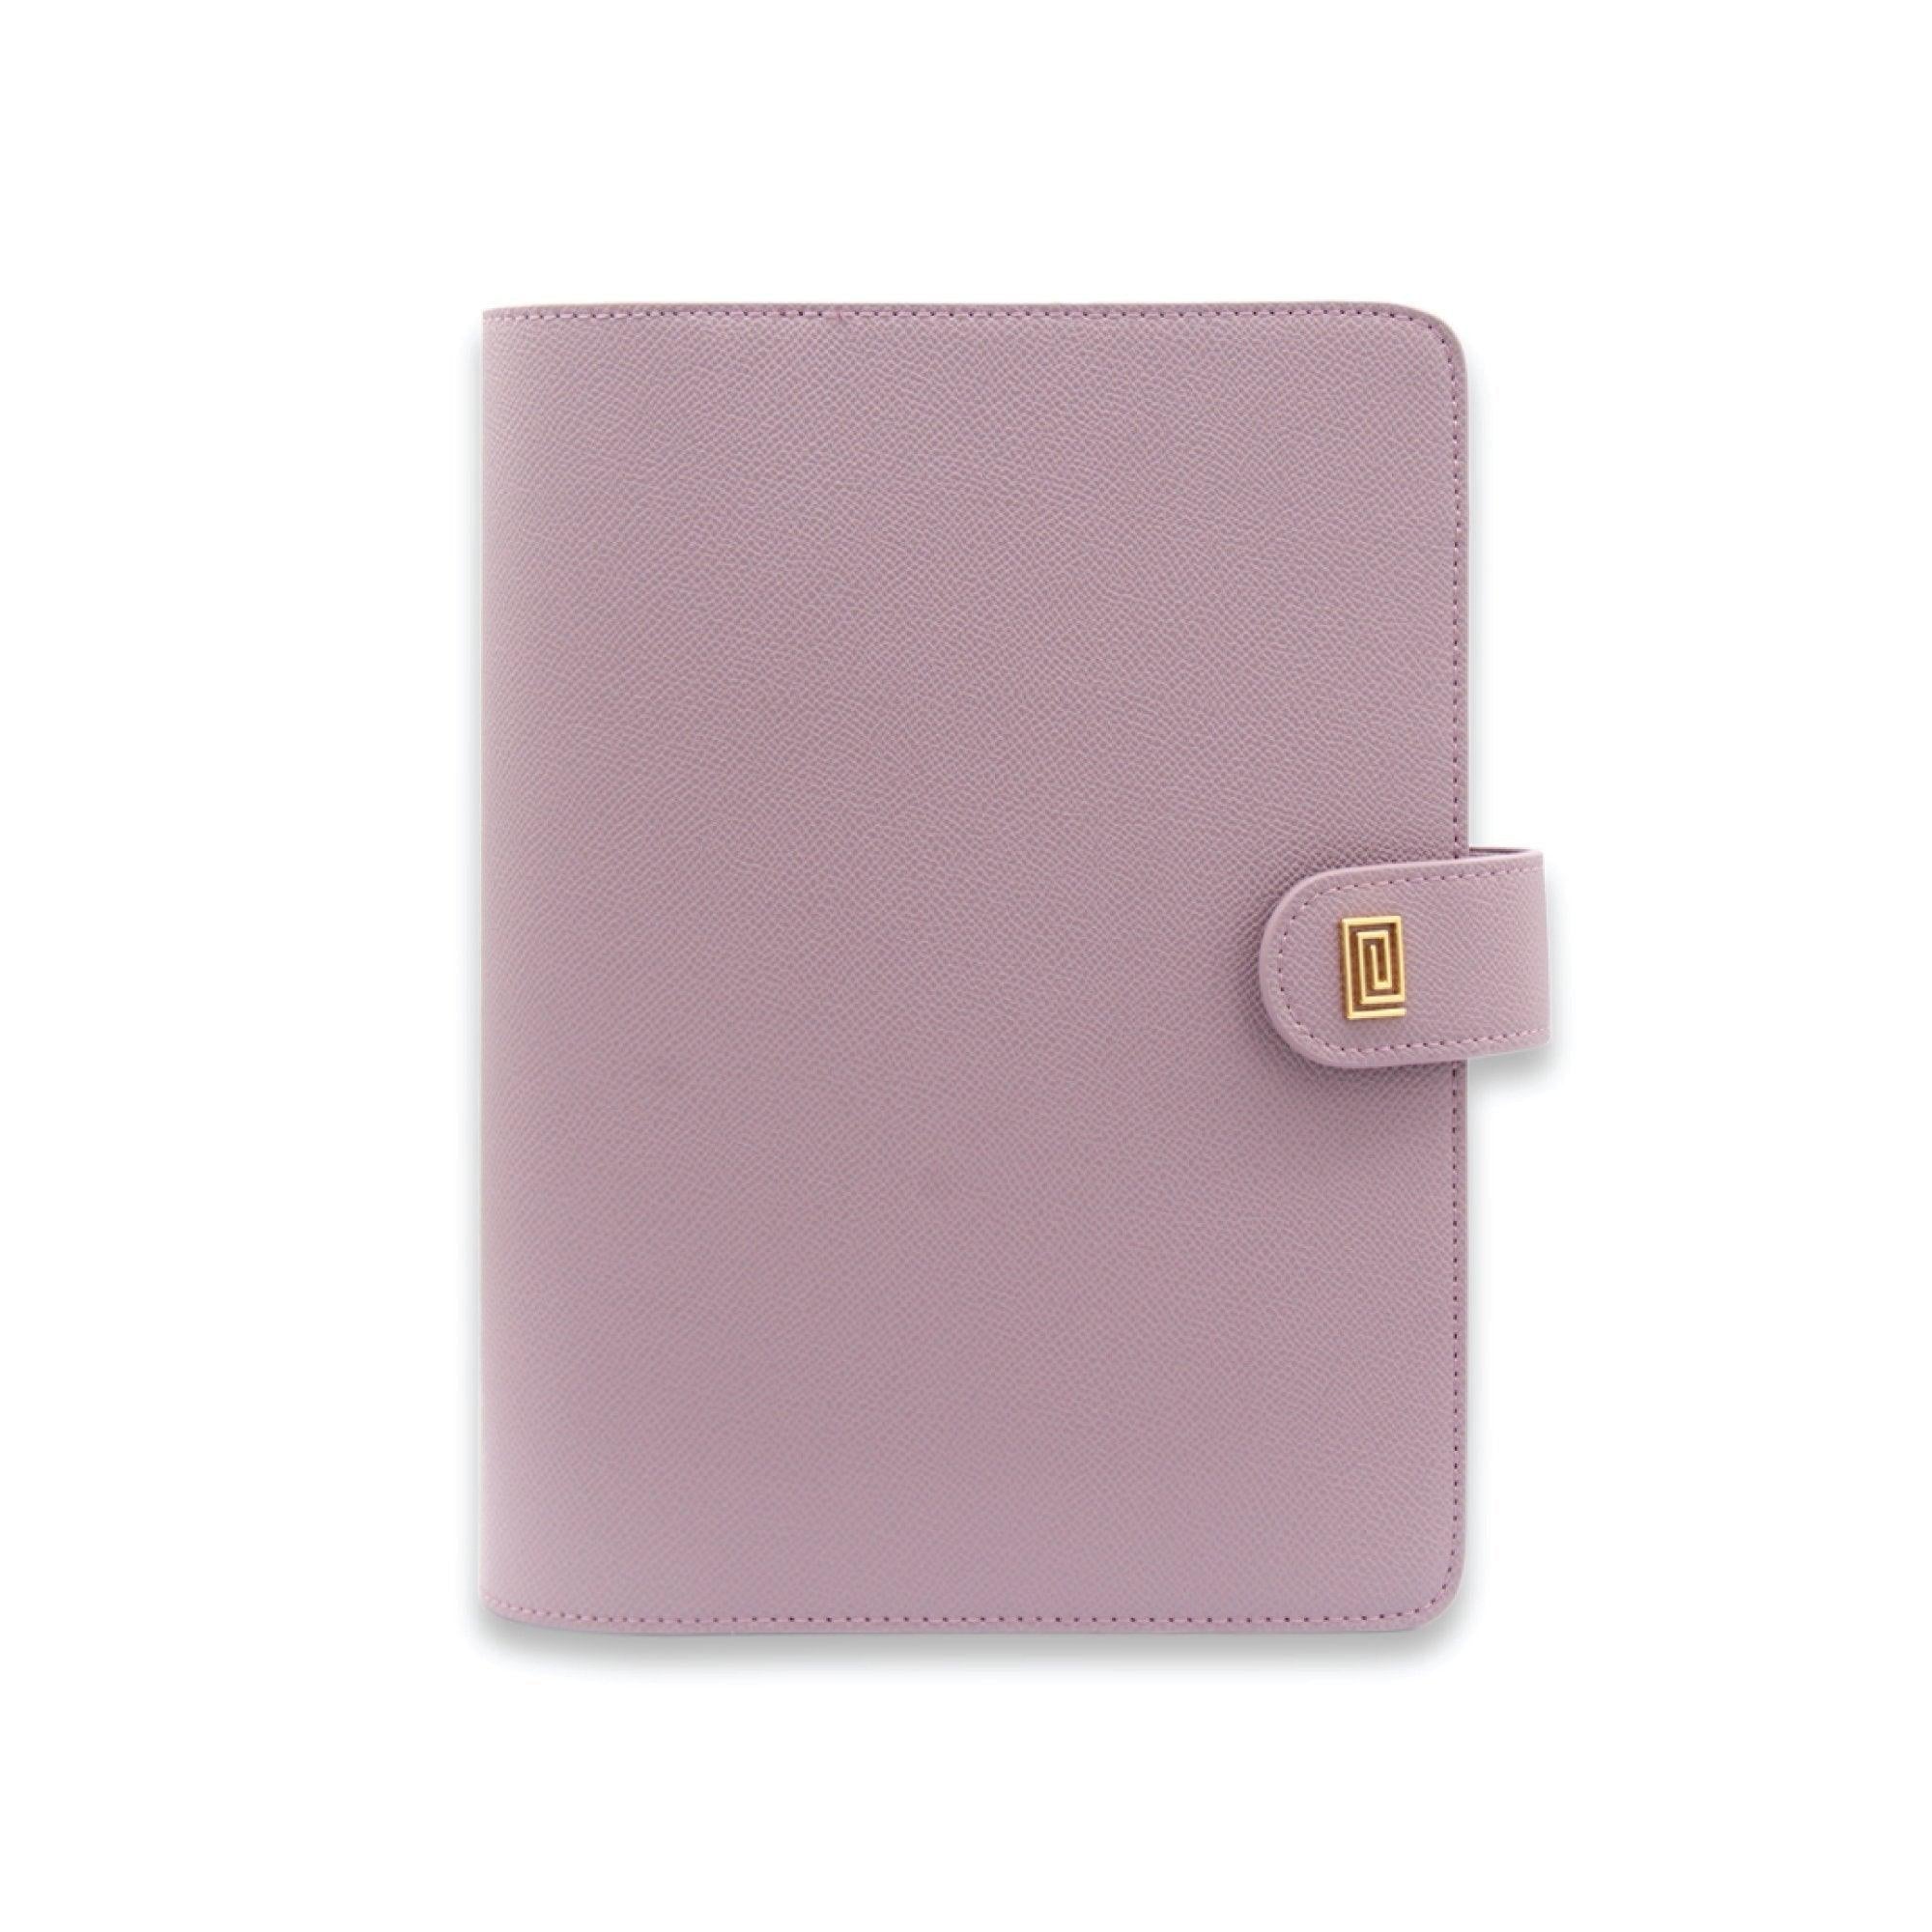 | OUTLET | XL5. Letra Plus Ringless Agenda | Letter 11 Disc or Coil Planner Cover | Final Sale | NOTIQ